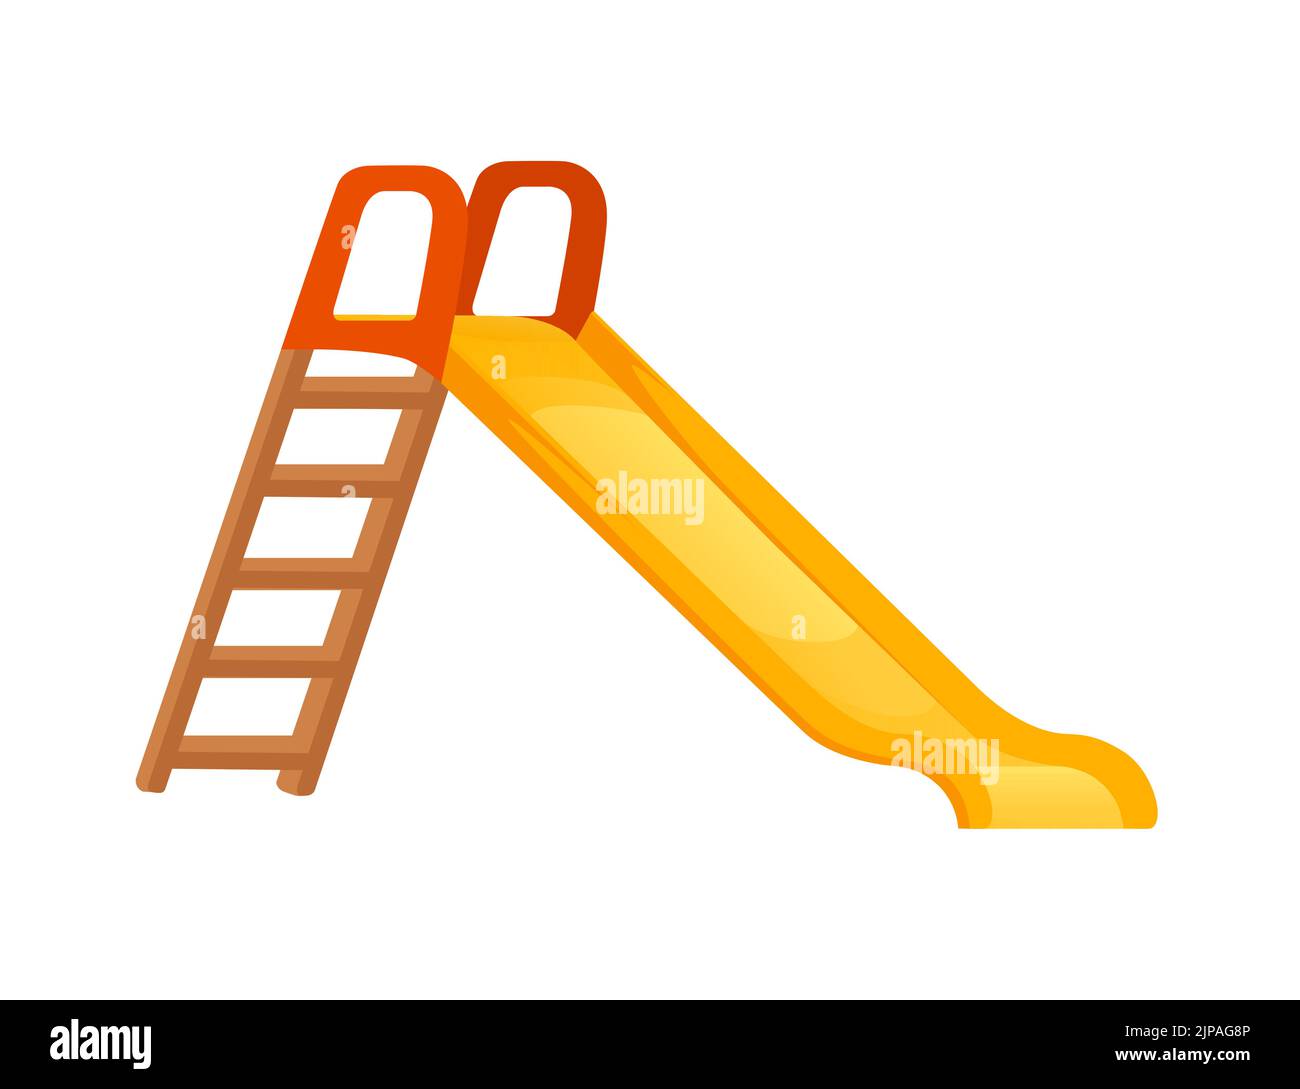 Slide playground vector icon. Kids park area play equipment for fun and summer game isolated on white background Stock Vector